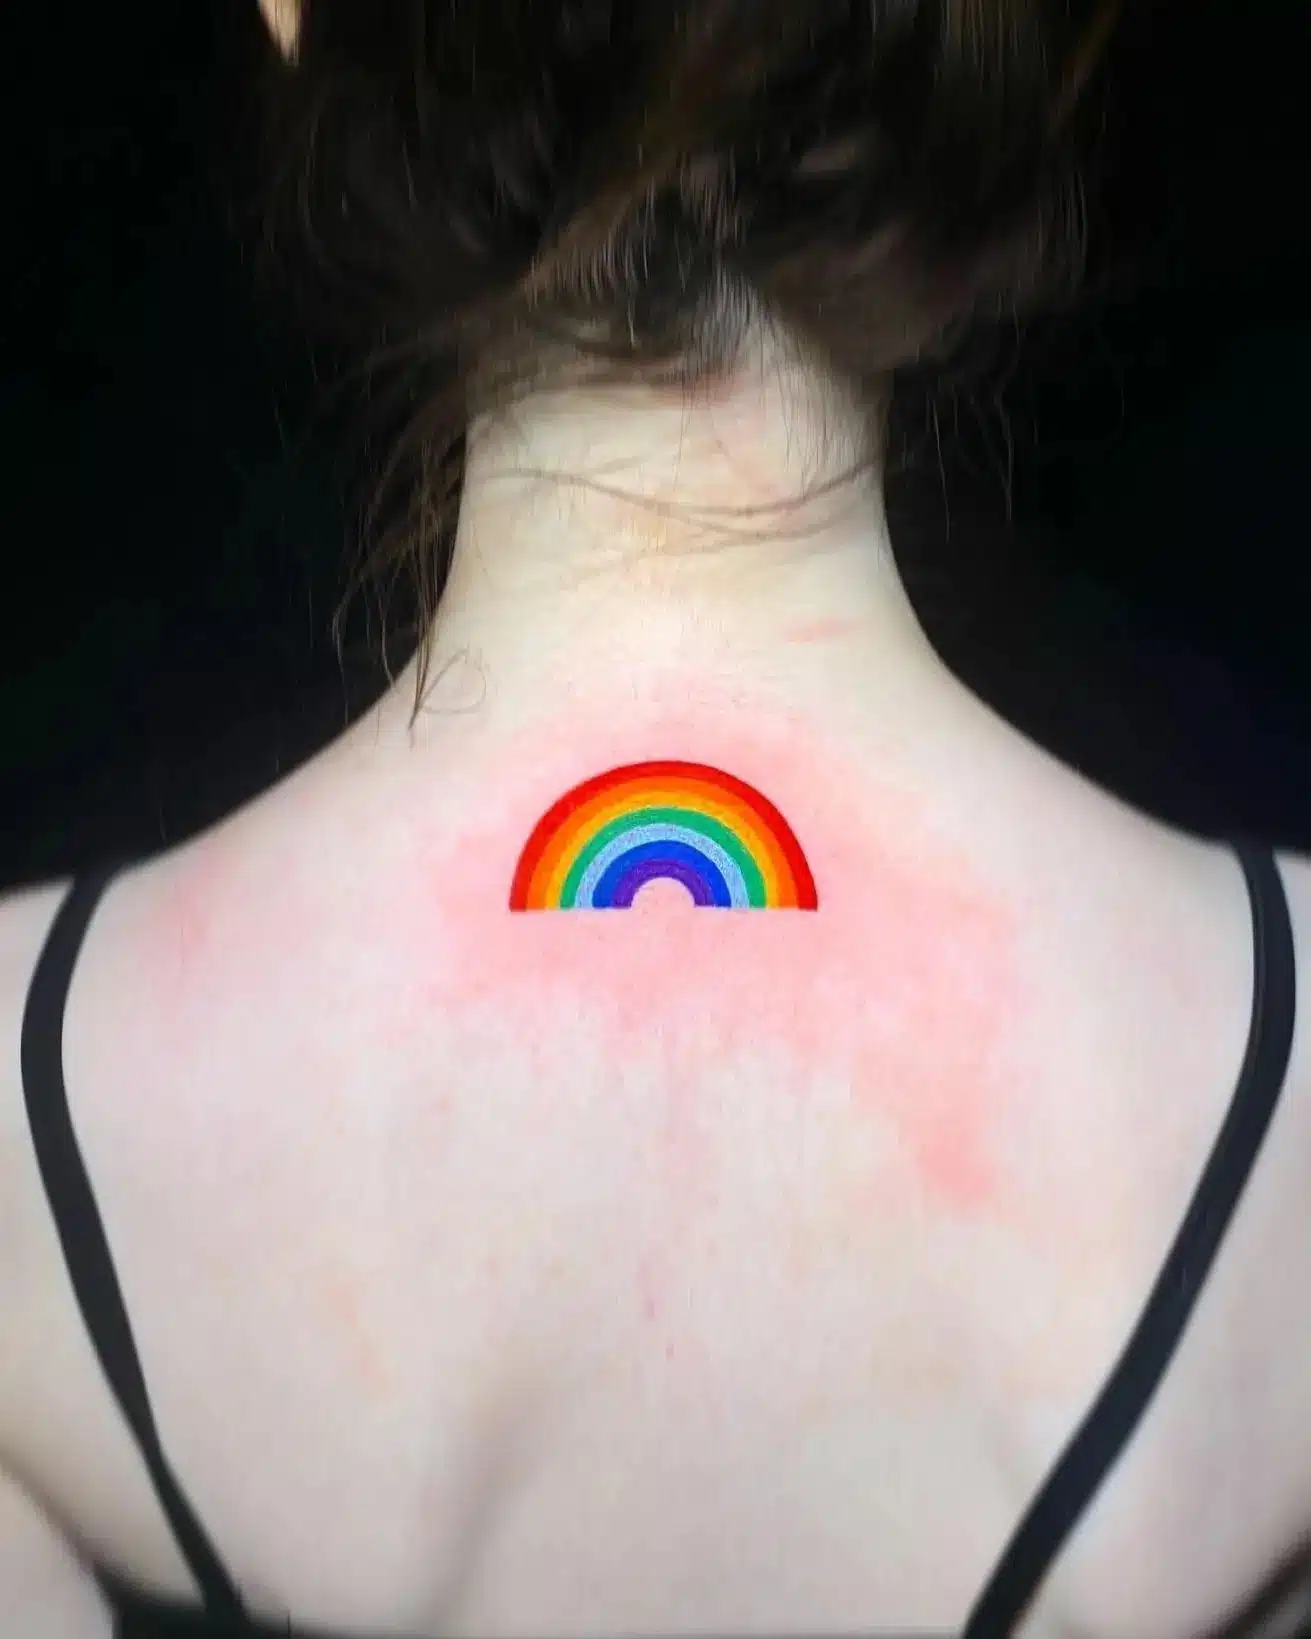 Rainbows are visions, but only illusions, and rainbows have nothing to hide.
We had a wonderful time facilitating this solid piece for Emma. Tattoo by own wee latina leprechaun Noemi.
noemi_tattoo 

Done using:
dragonhawkofficial
kurosumitattooink
Rainbow connunigloves Supplies by our kind sponsors:
magnumtattoosupplies.uk 

                  